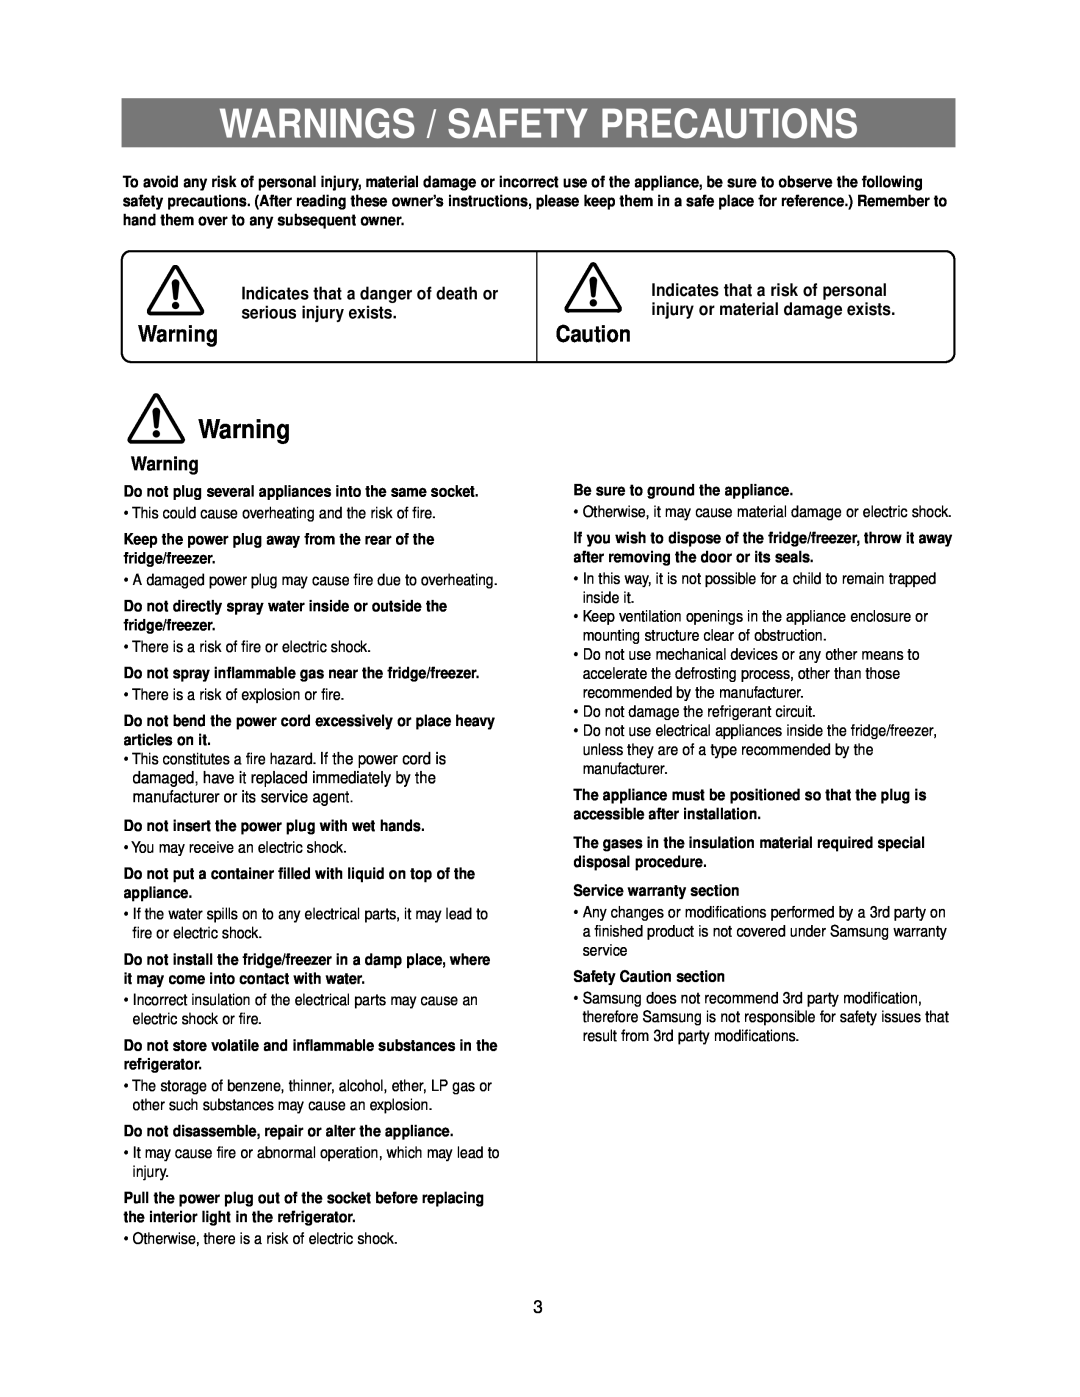 Samsung RB193KASB owner manual Warnings / Safety Precautions, Indicates that a danger of death or serious injury exists 